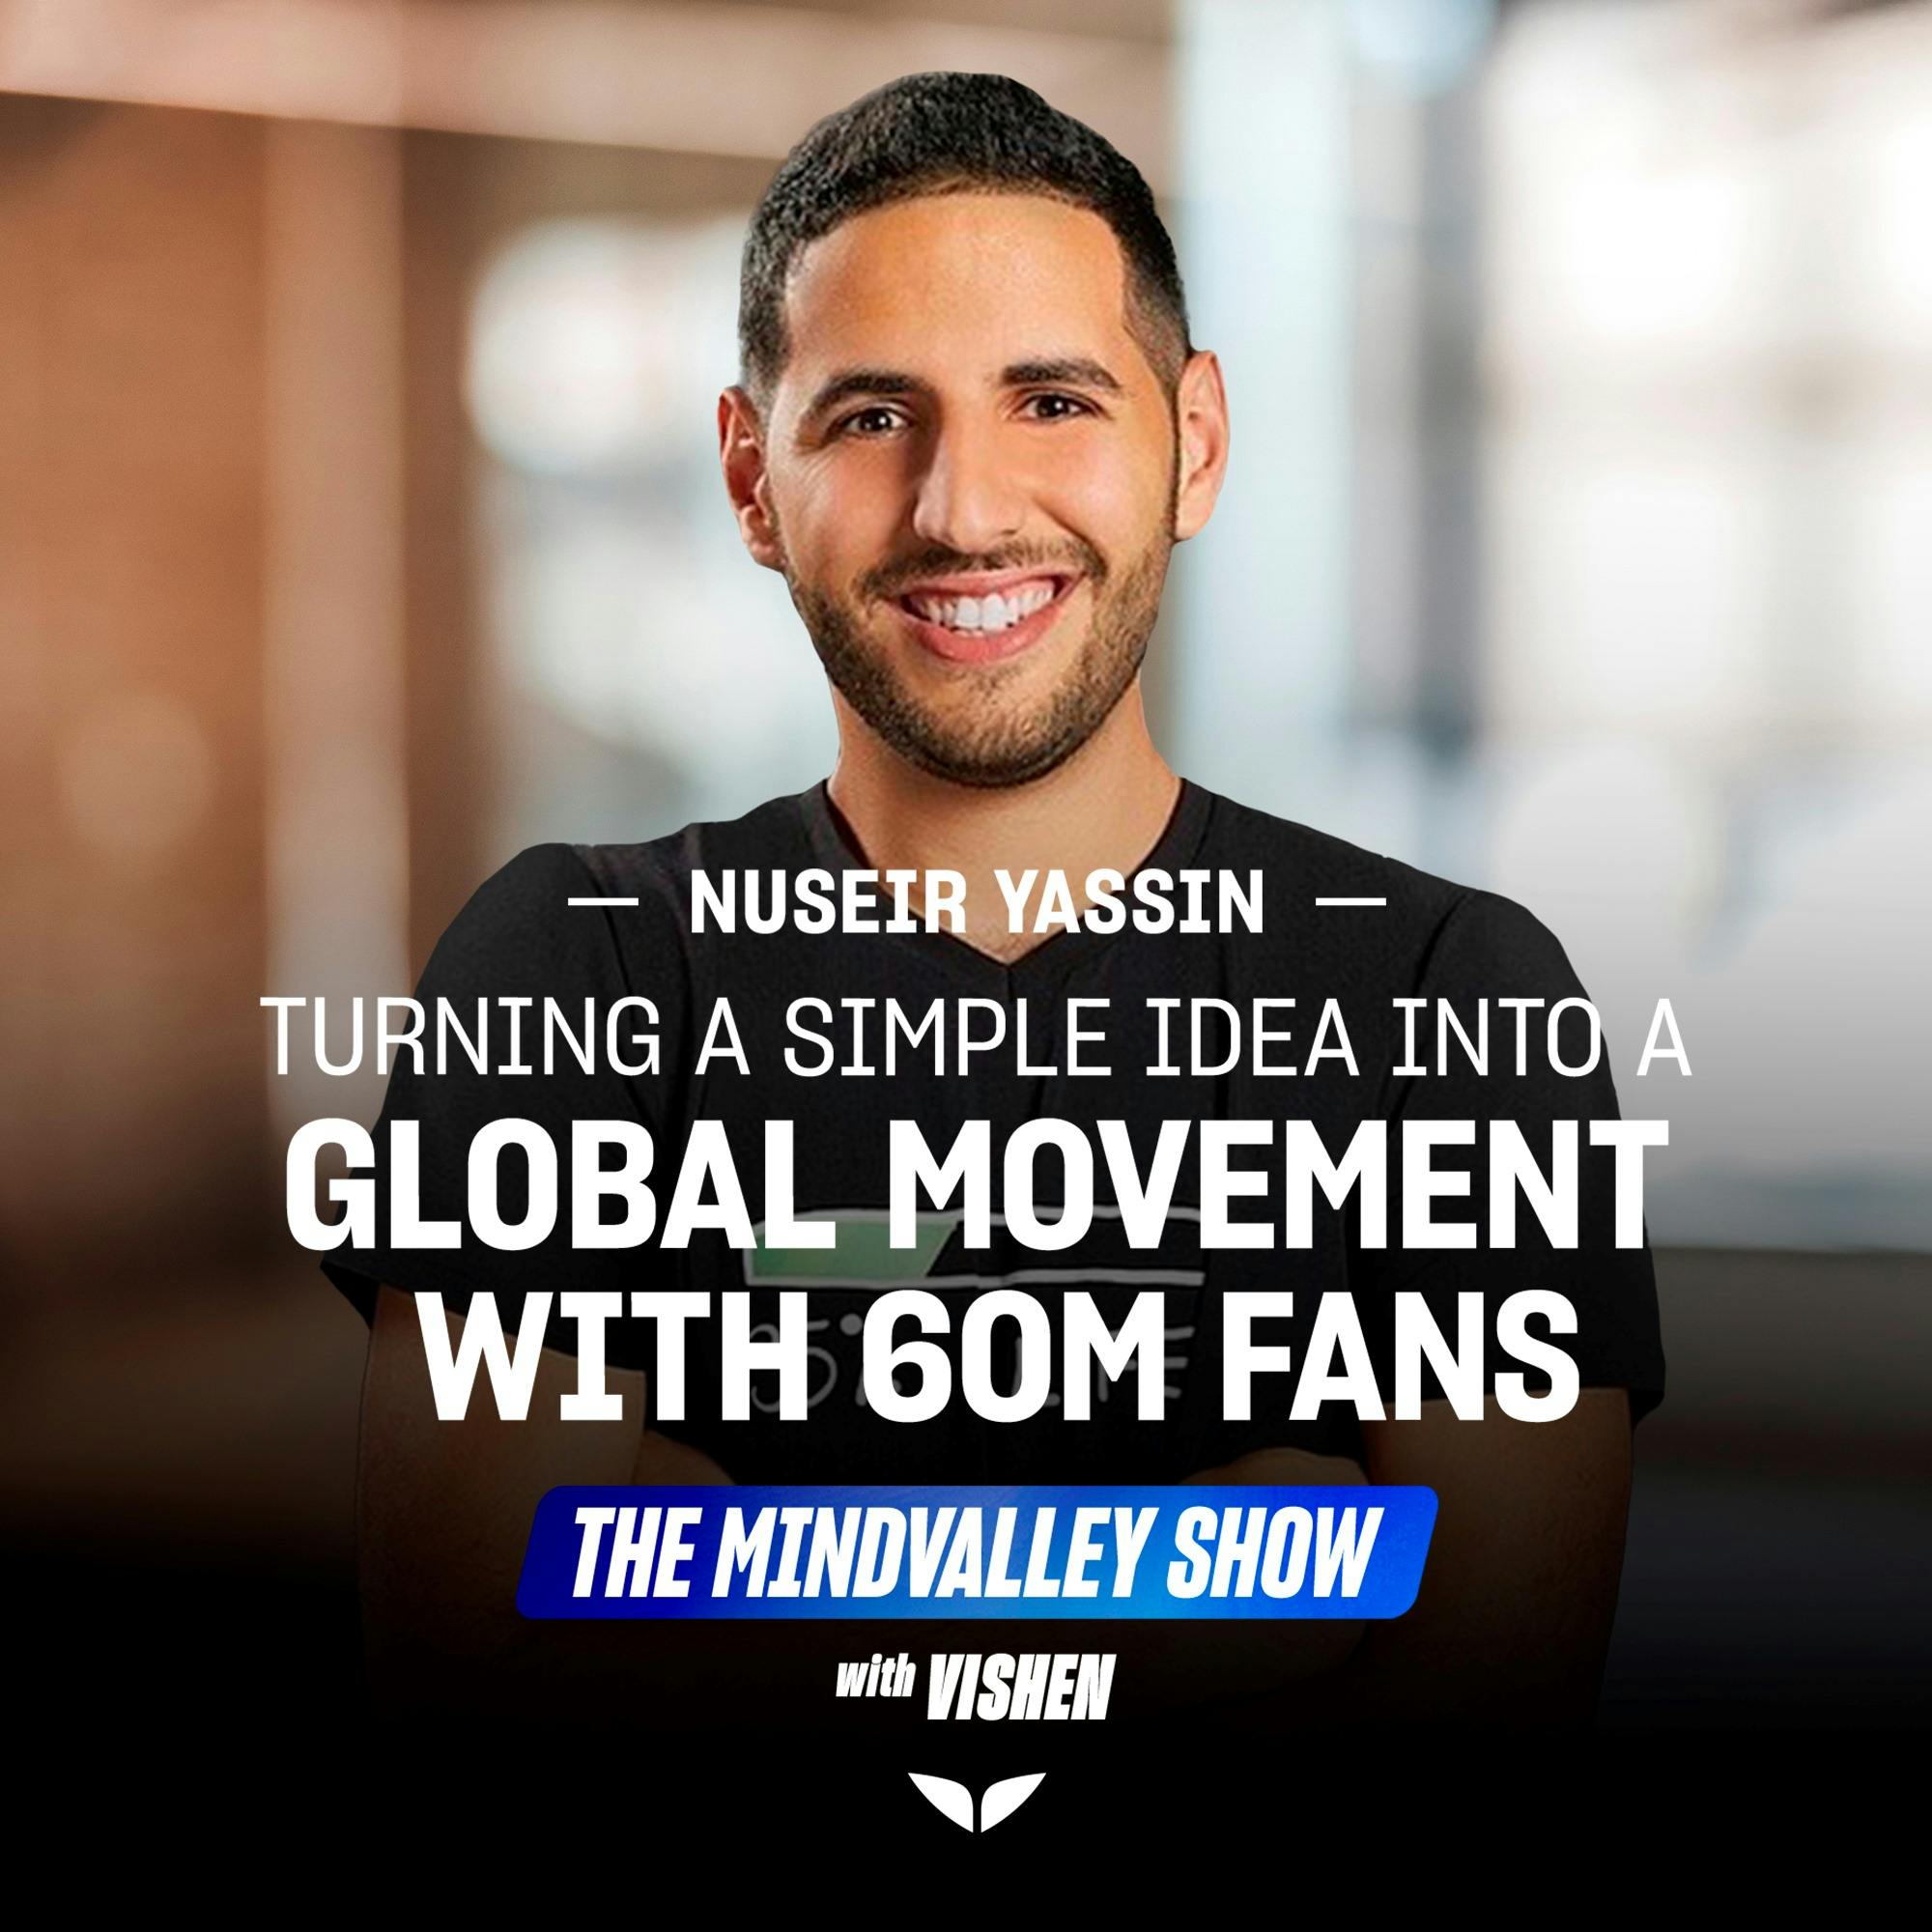 How NasDaily's Nuseir Yassin Turned a Simple Idea Into A Global Movement With 60M Fans